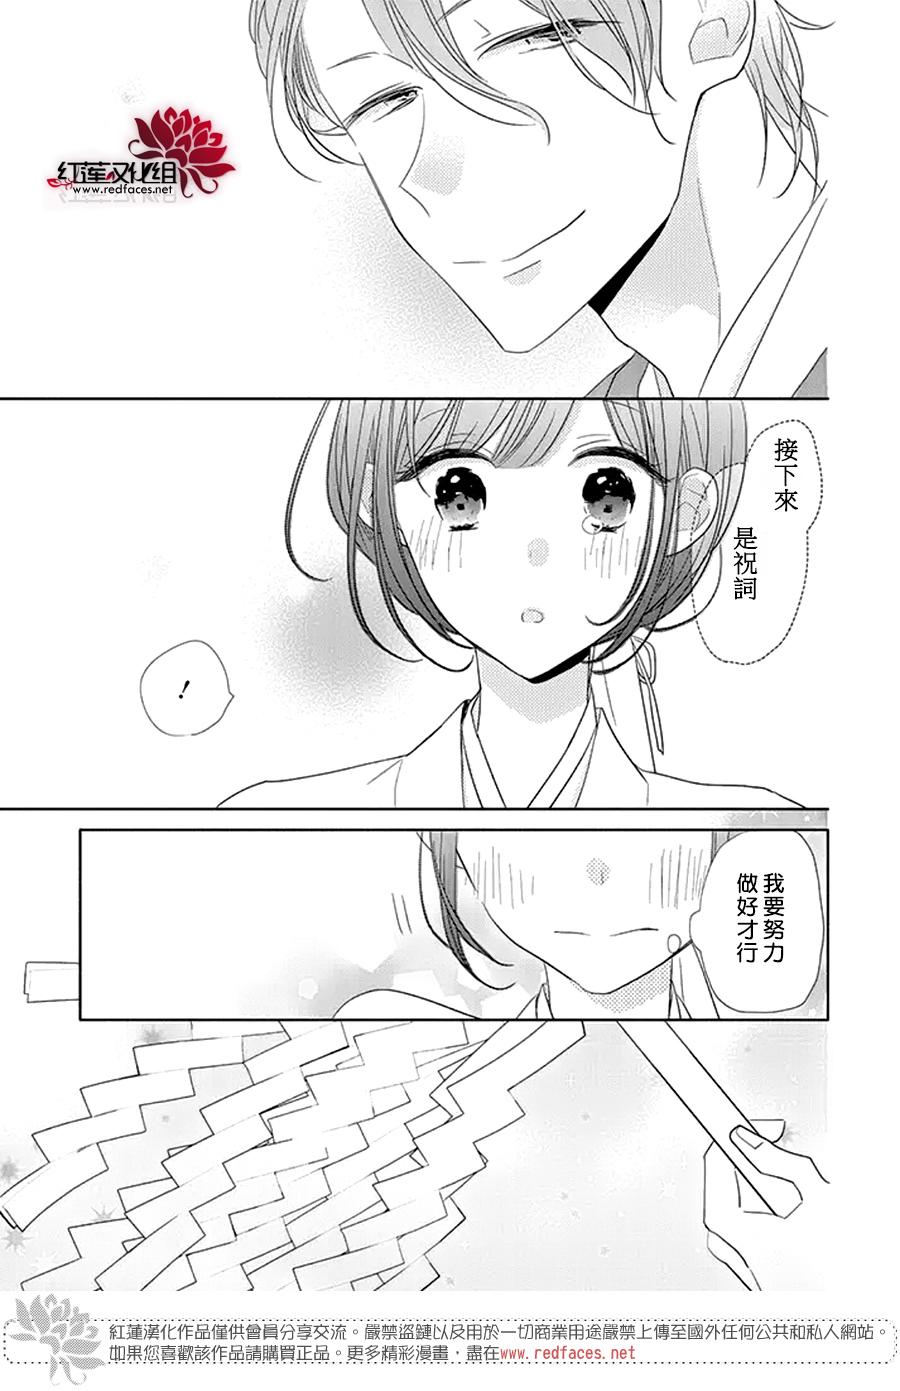 If given a second chance - 23話 - 2